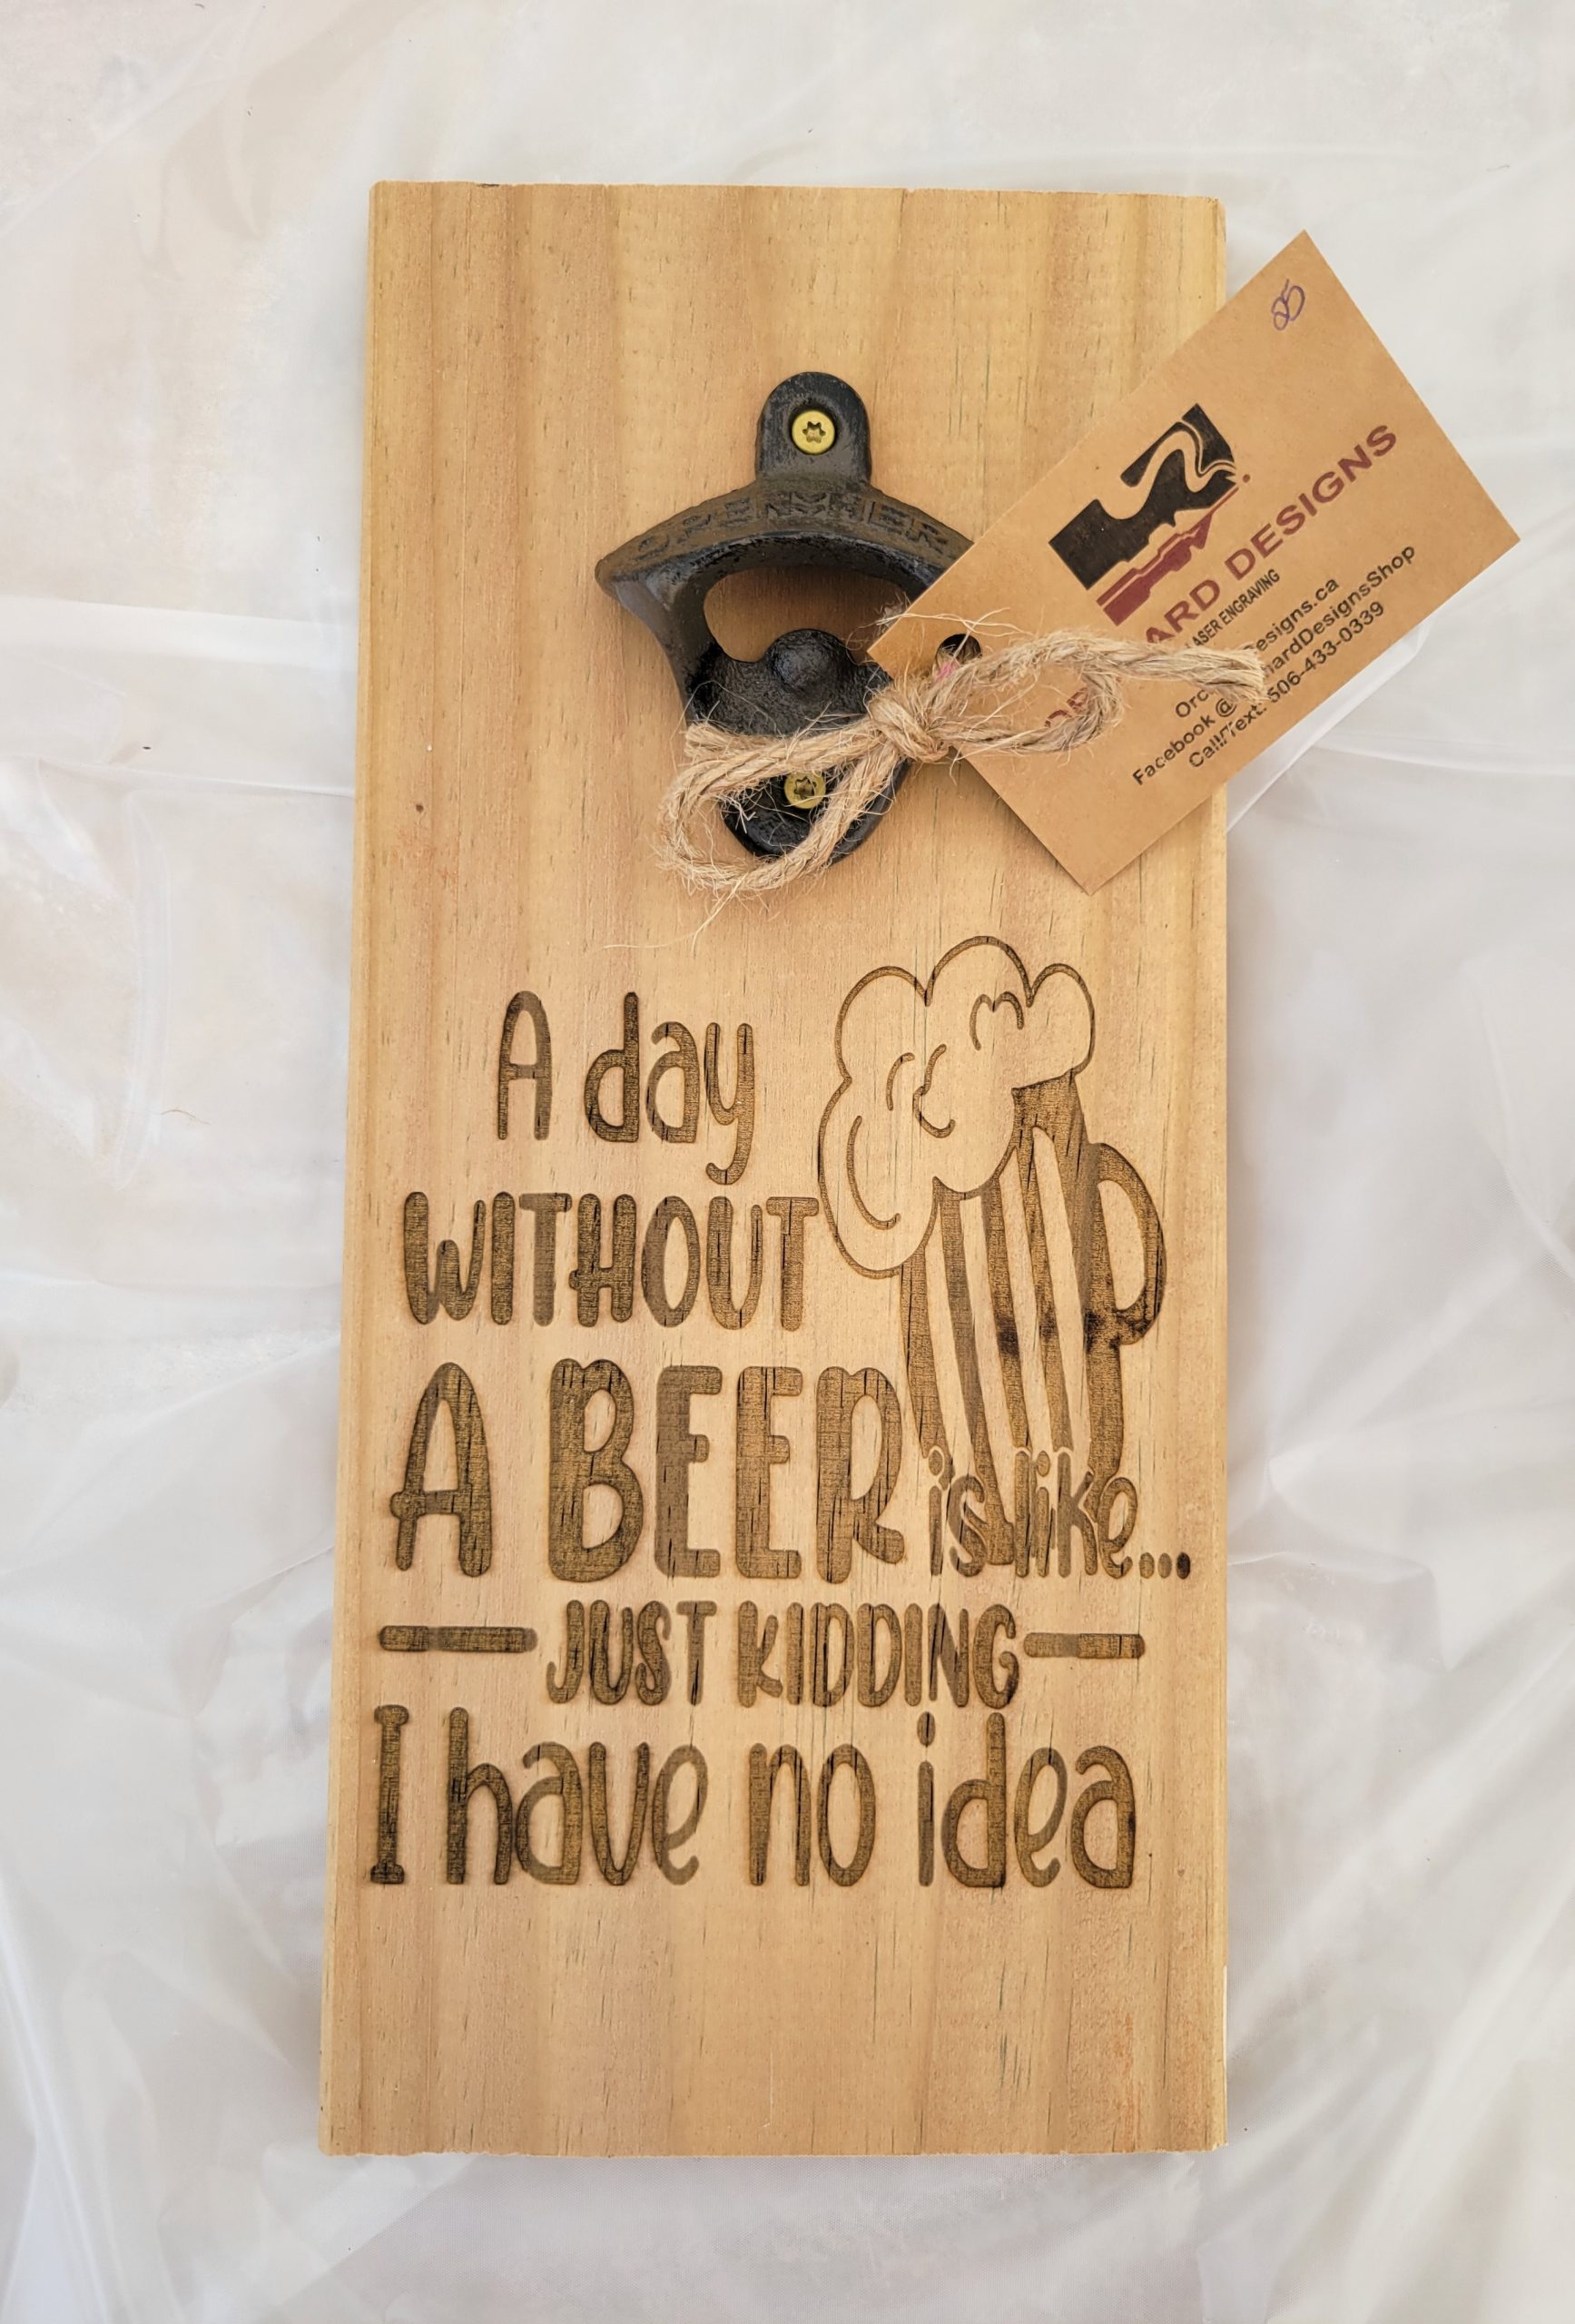 wall-hanging-bottle-opener-a=day-without-beer-is-like-just-kidding-I-have-no-idea